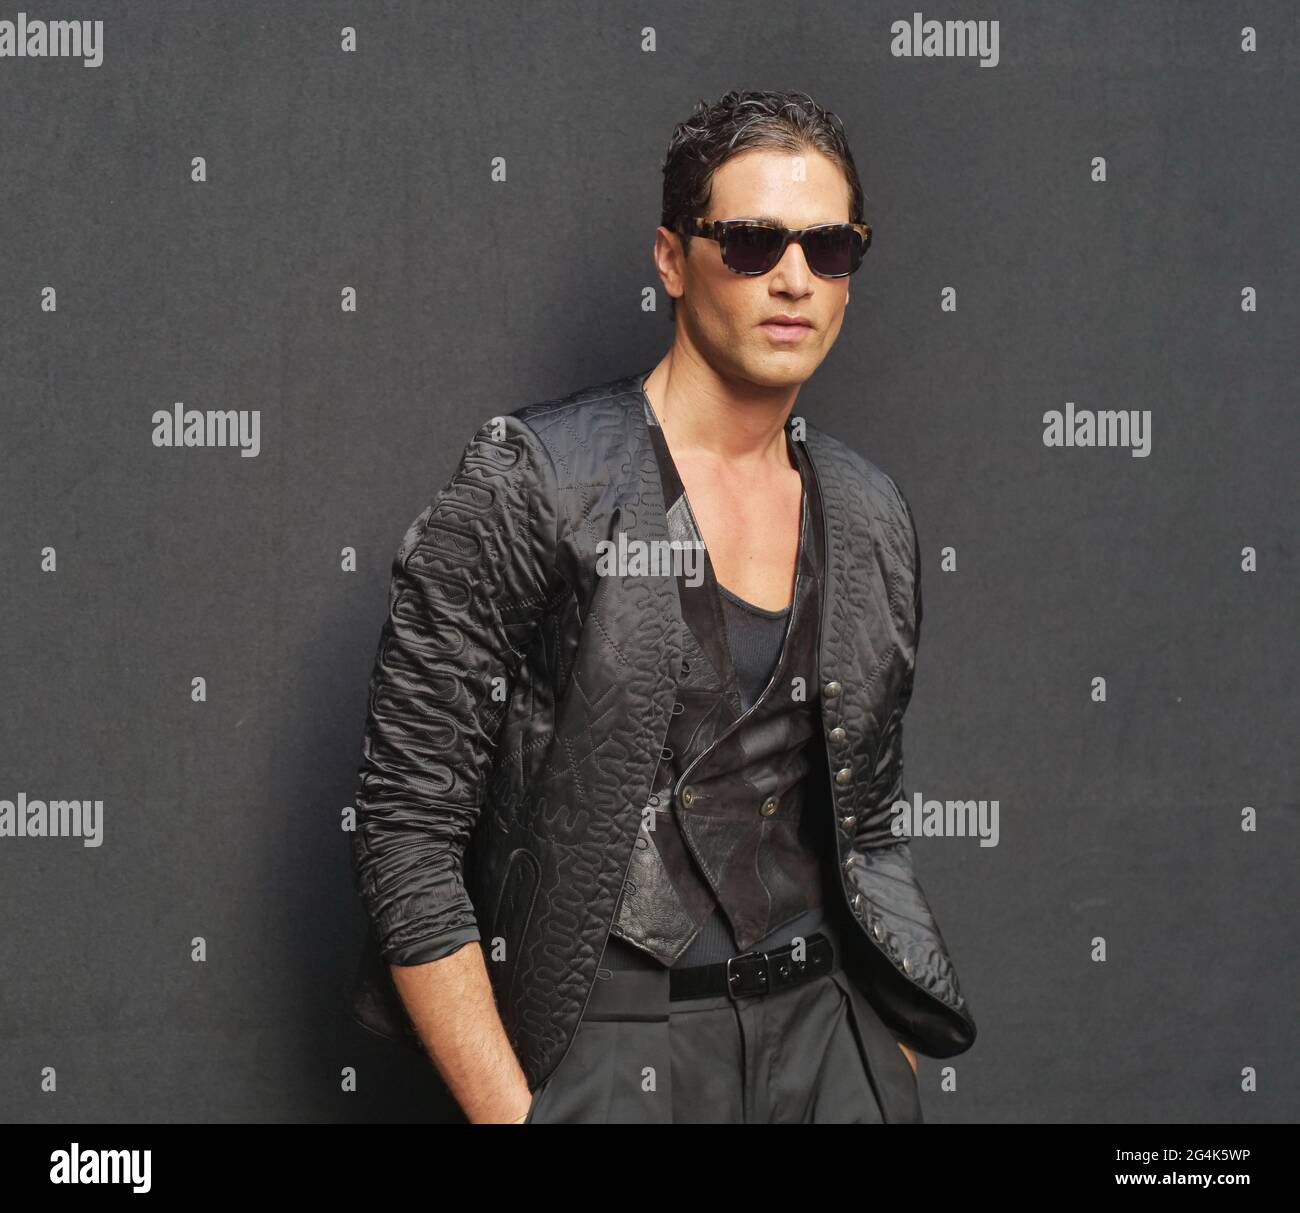 Italian top model Fabio Mancini posing for photographers after Armani  fashion show during MFW 2021 Man collections Stock Photo - Alamy